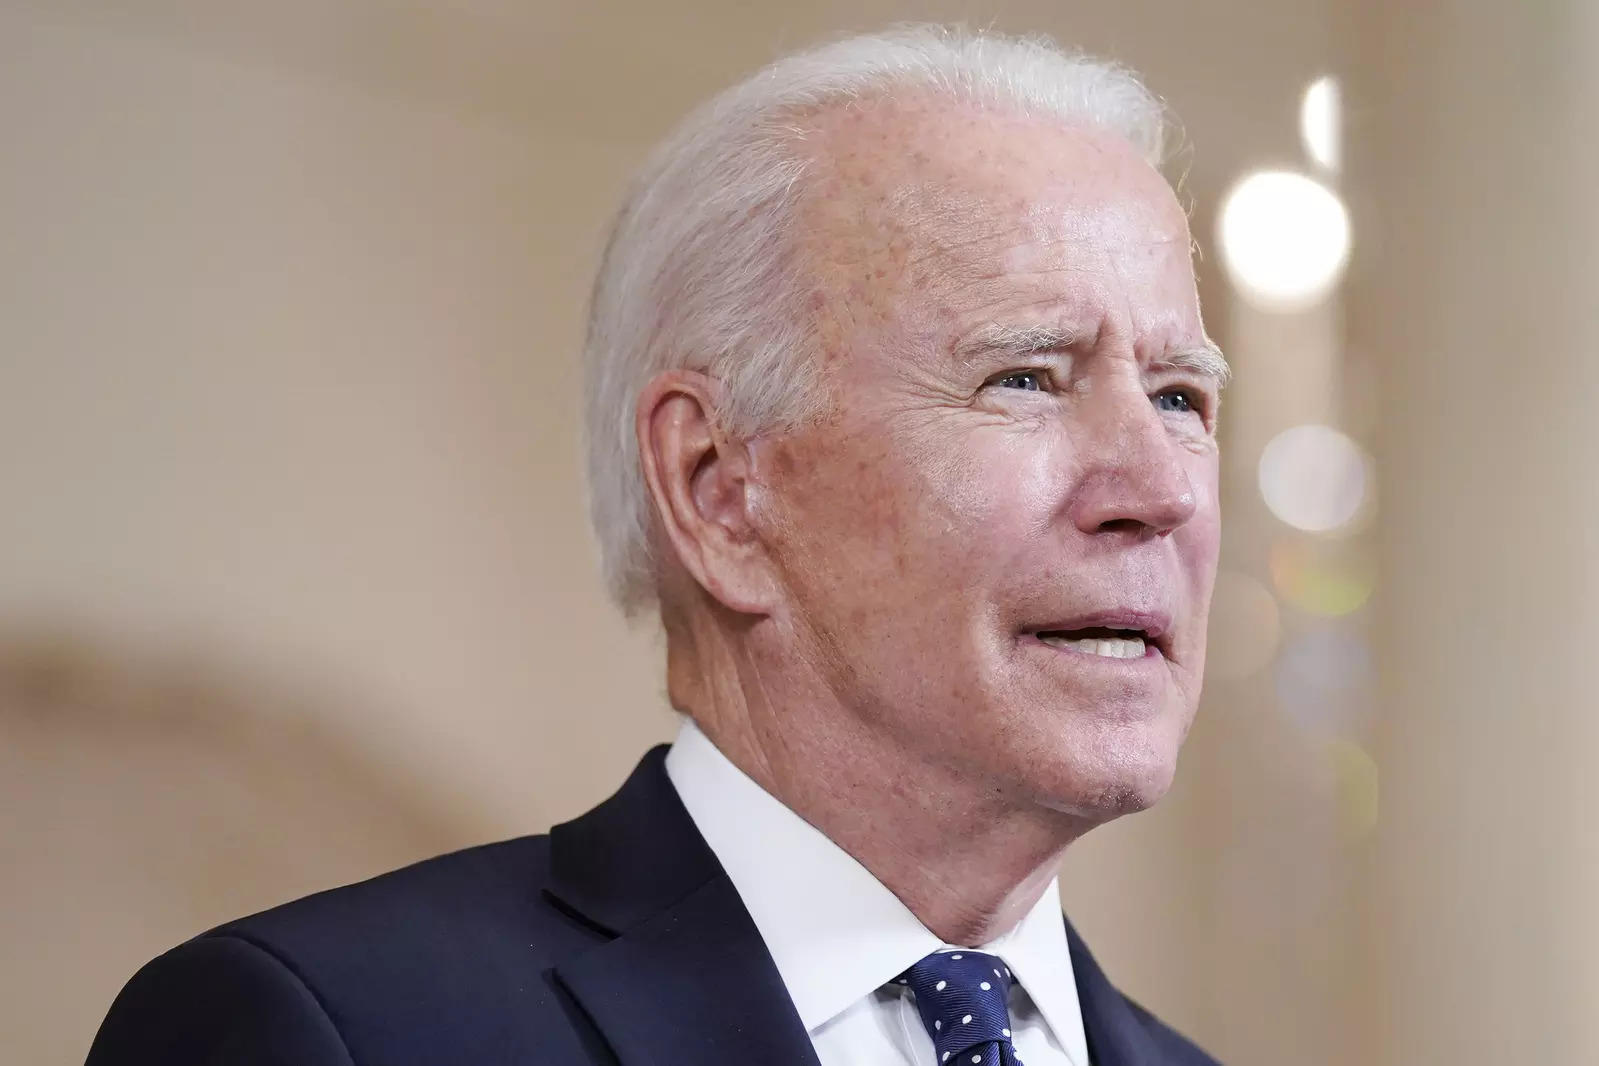  Biden has proposed spending $20 billion to electrify at least 20% of school buses and $25 billion to electrify some transit vehicles as part of his $2.3 trillion infrastructure and jobs plan.